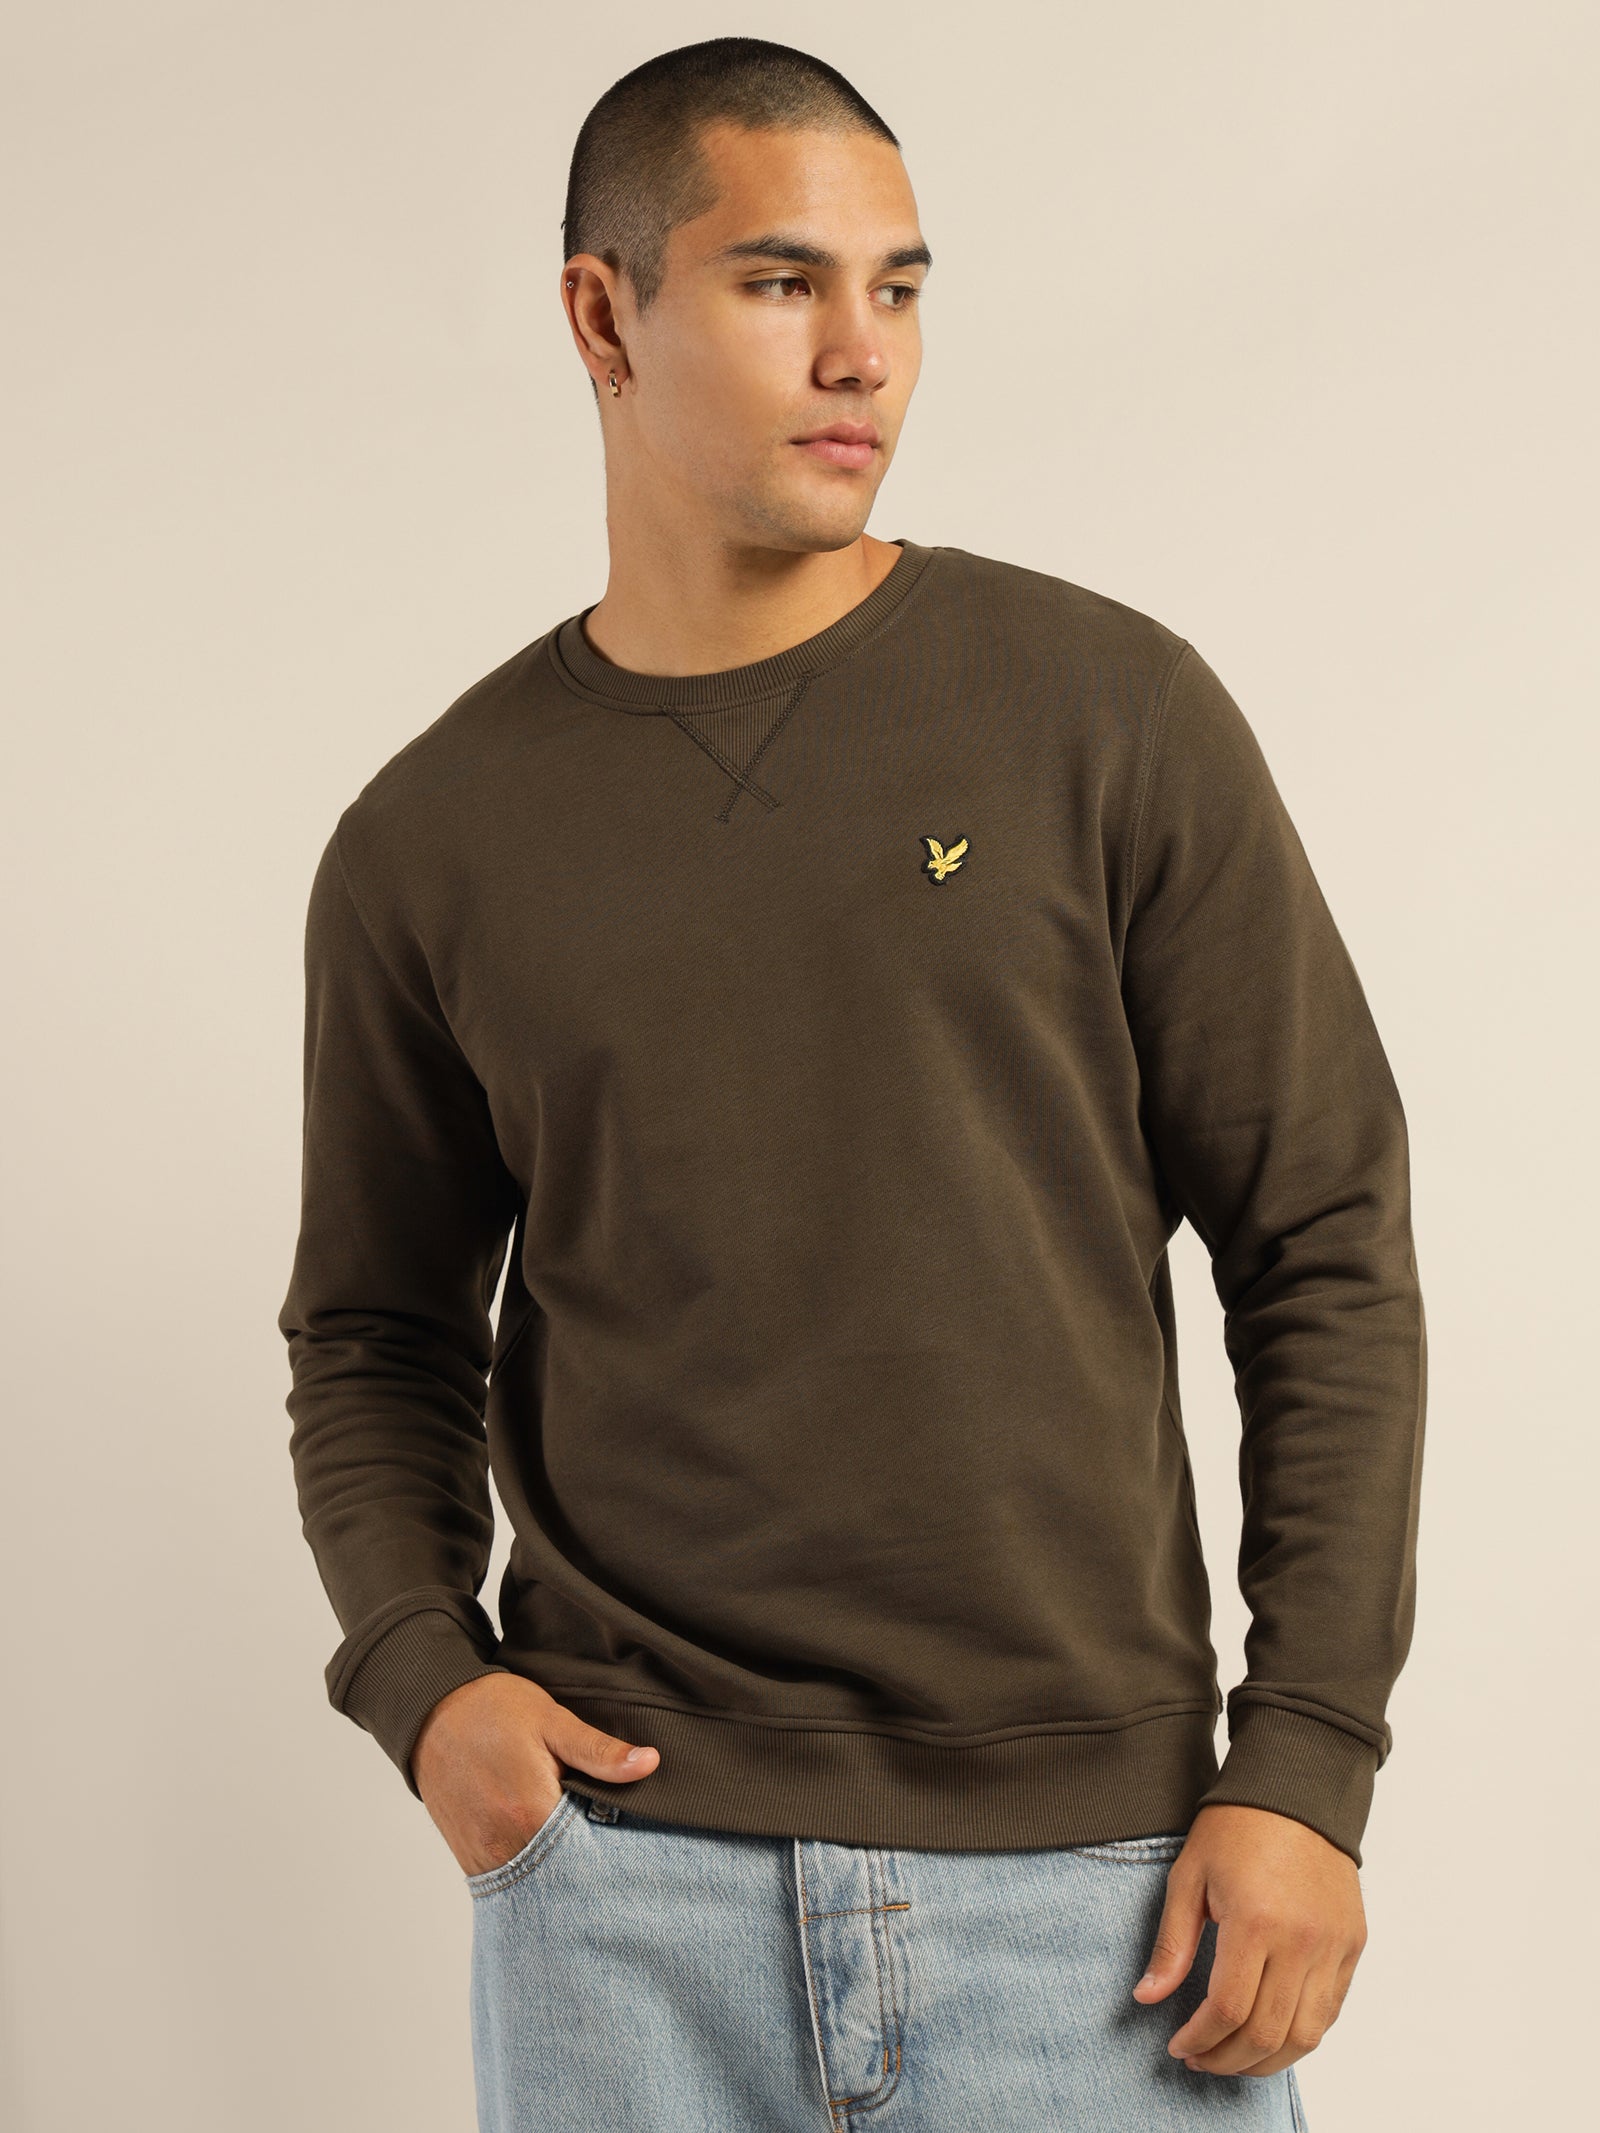 Crew Neck Sweats in Olive Green